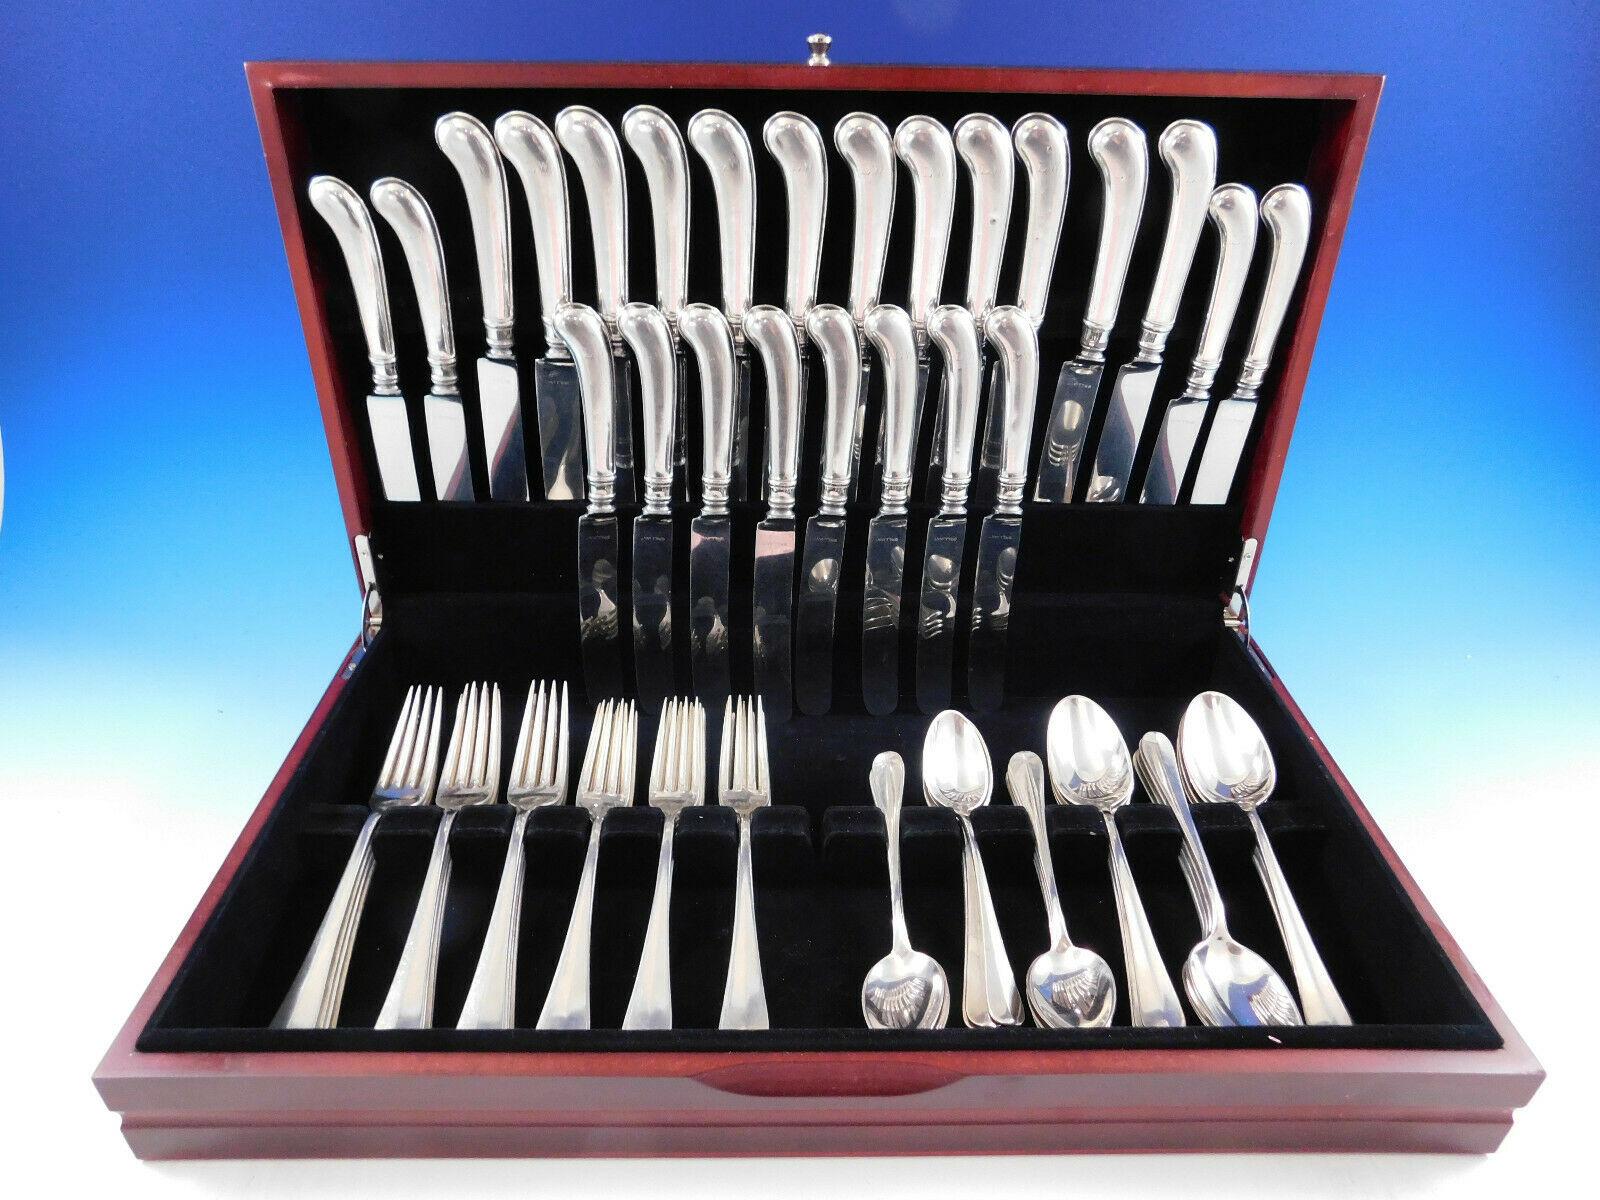 Superb Rattail Antique by Dominick and Haff sterling silver Dinner & Luncheon size Flatware set with fabulous pistol-grip handle knives - 72 pieces. This set includes:
 
12 dinner size knives, pistol-grip, 9 3/4